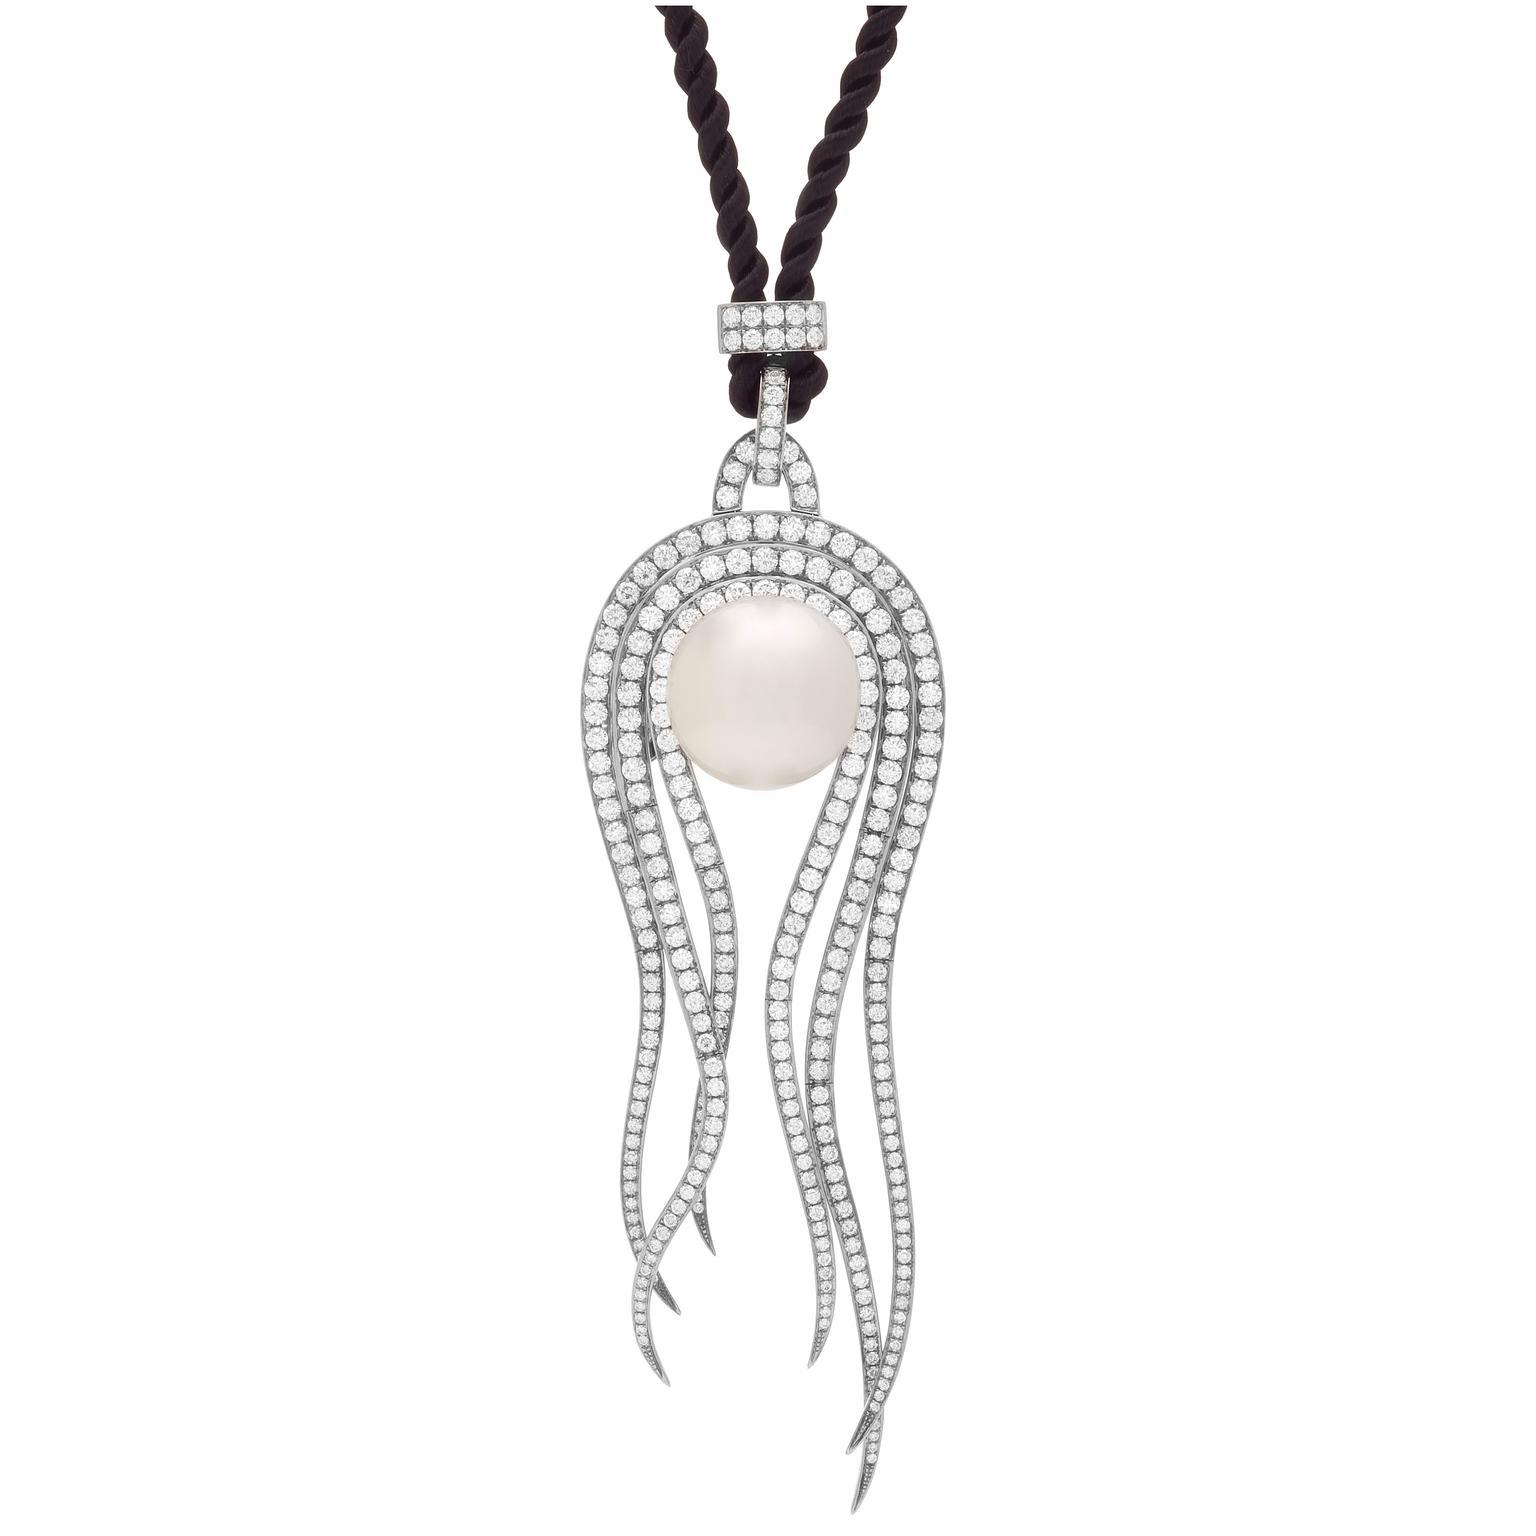 Mr Lieou necklace with diamonds and pearls